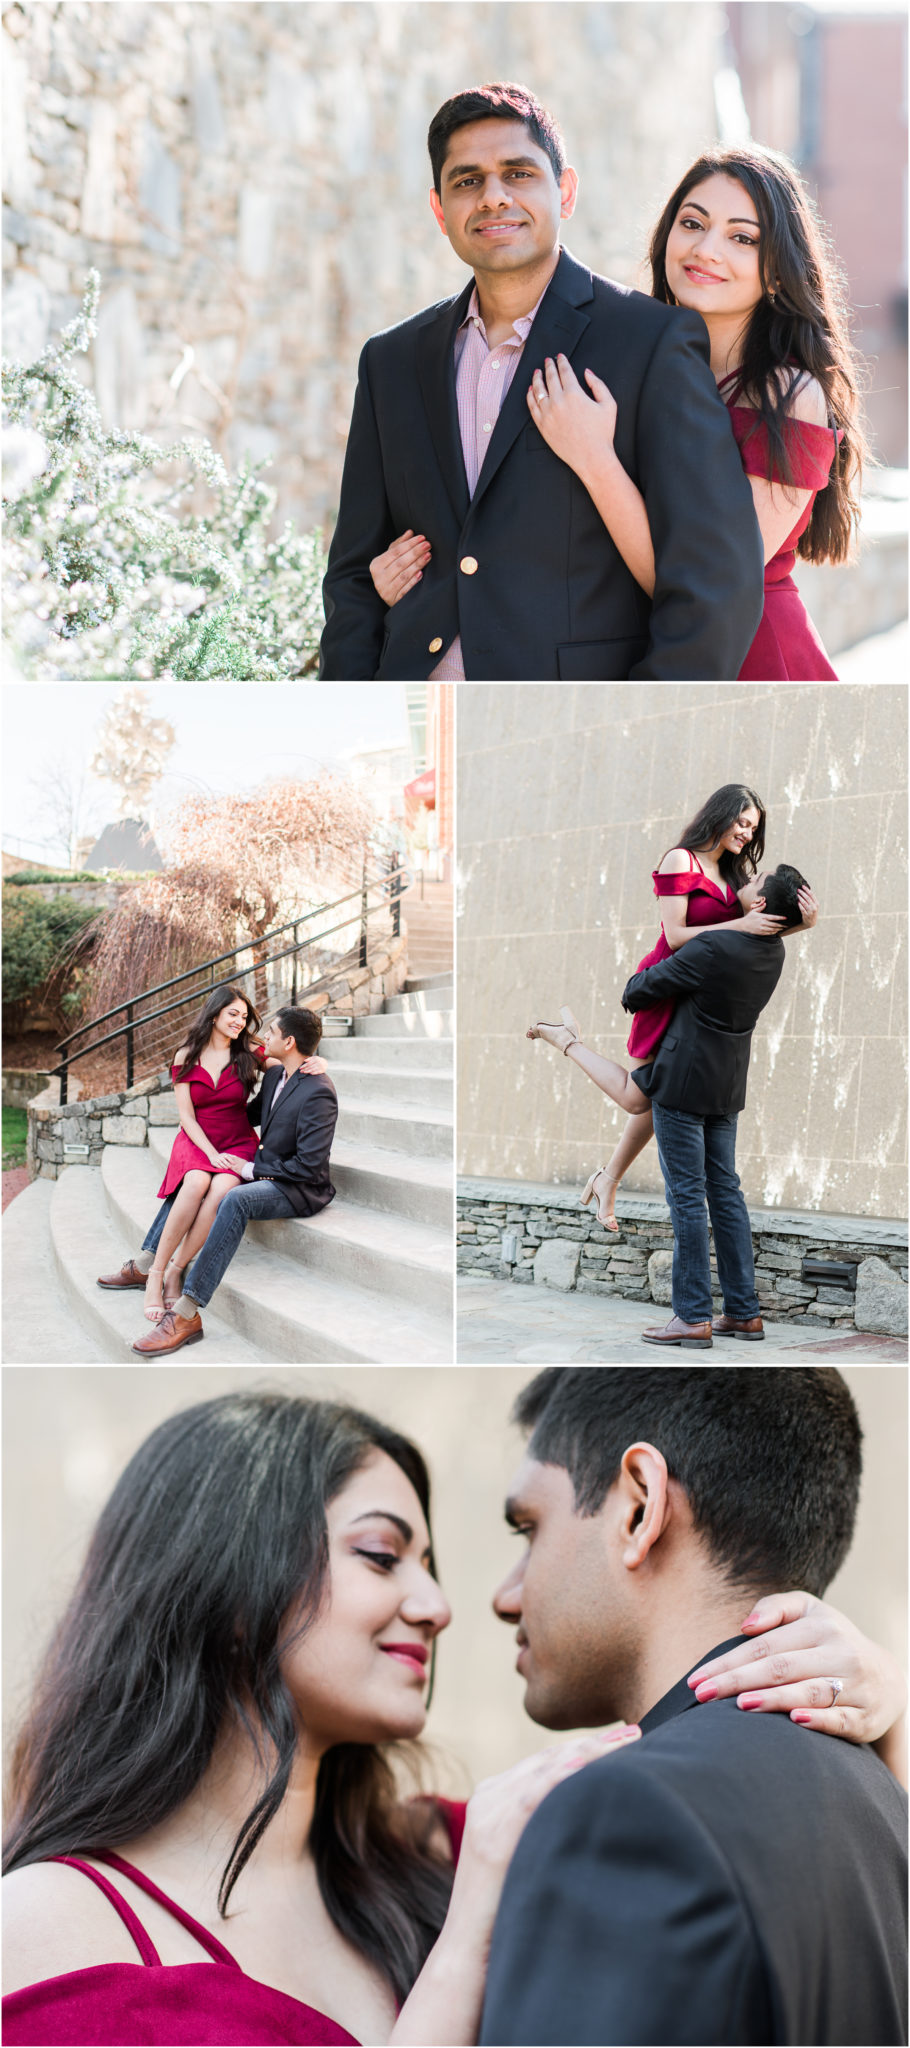 Falls Parks Engagement Session in Downtown Greenville